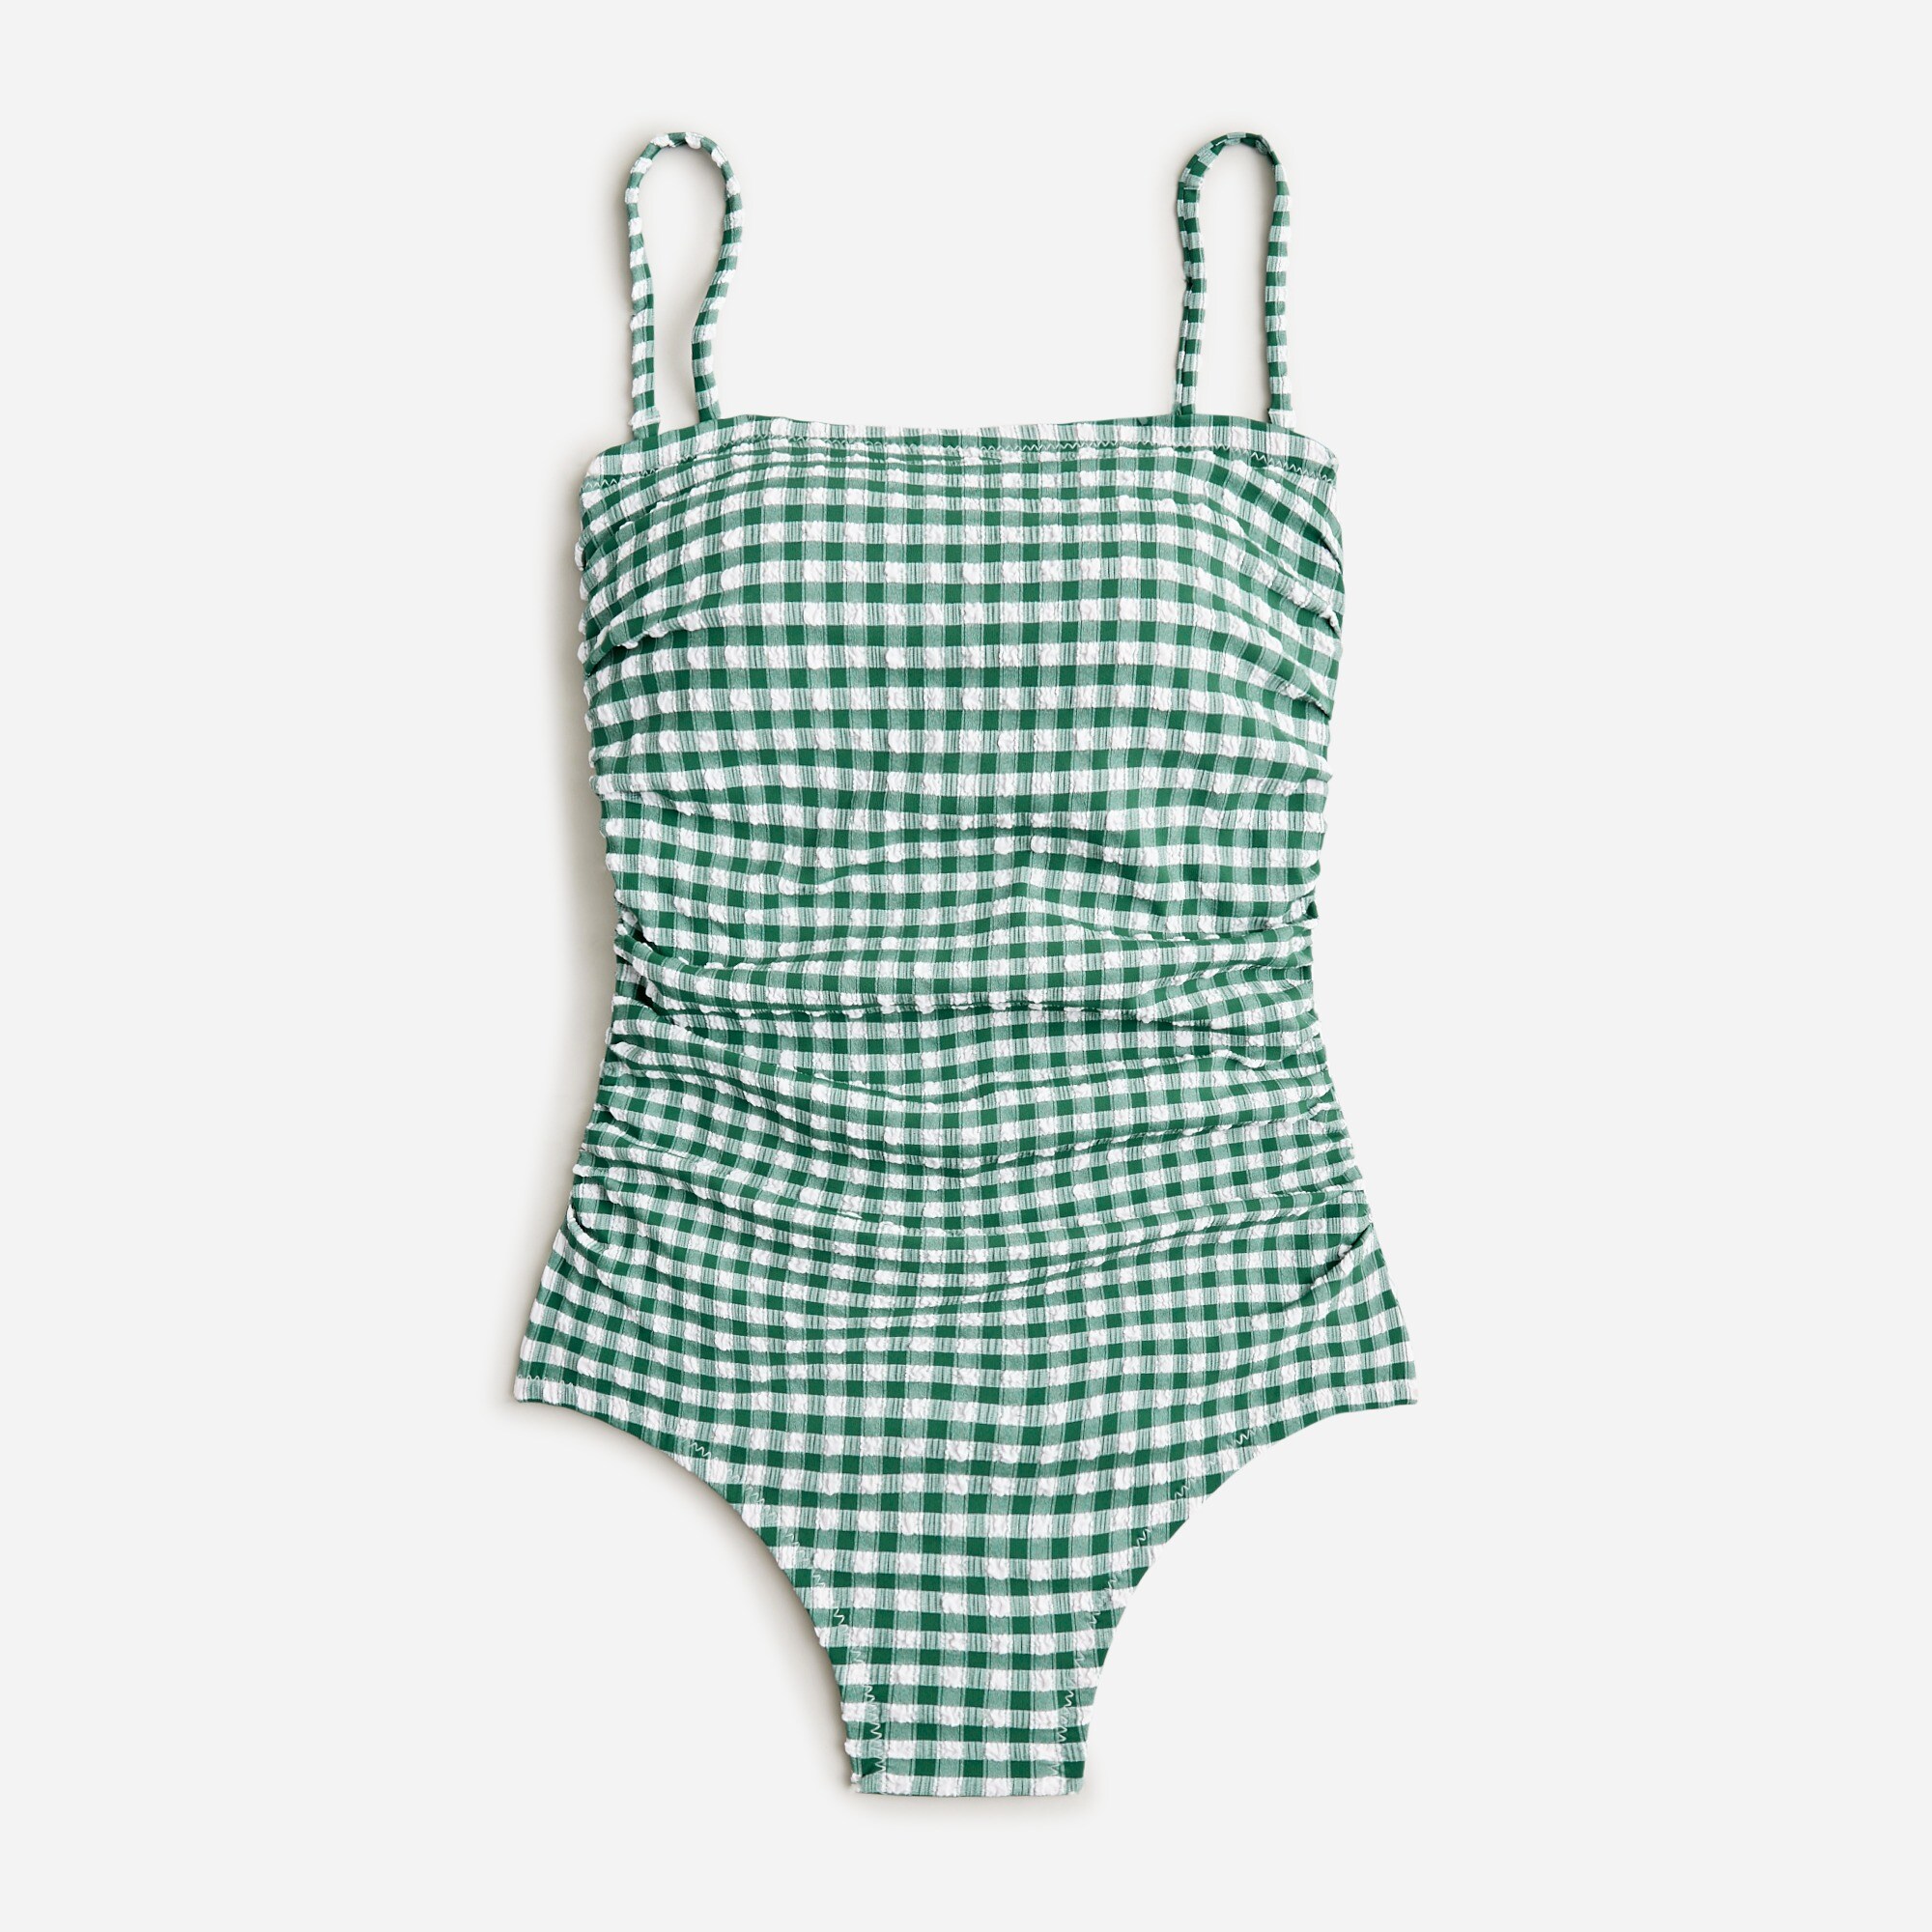  Ruched bandeau one-piece swimsuit in gingham